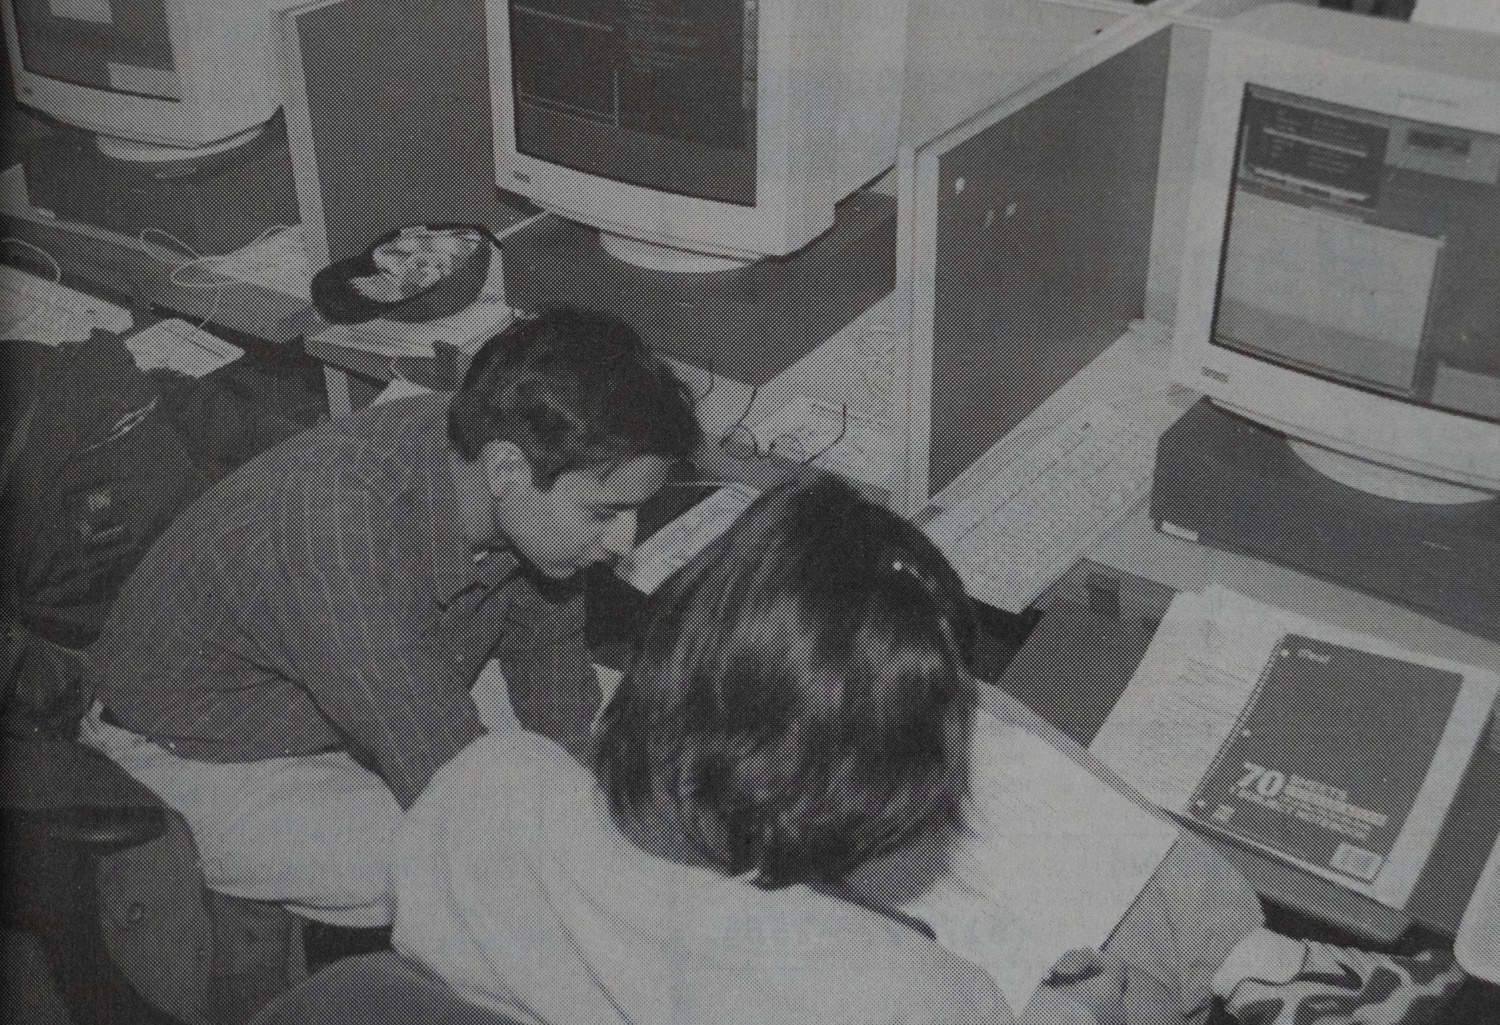 Two students study in the library during their final exams in 1997. Online educational tools have transformed Harvard academics.